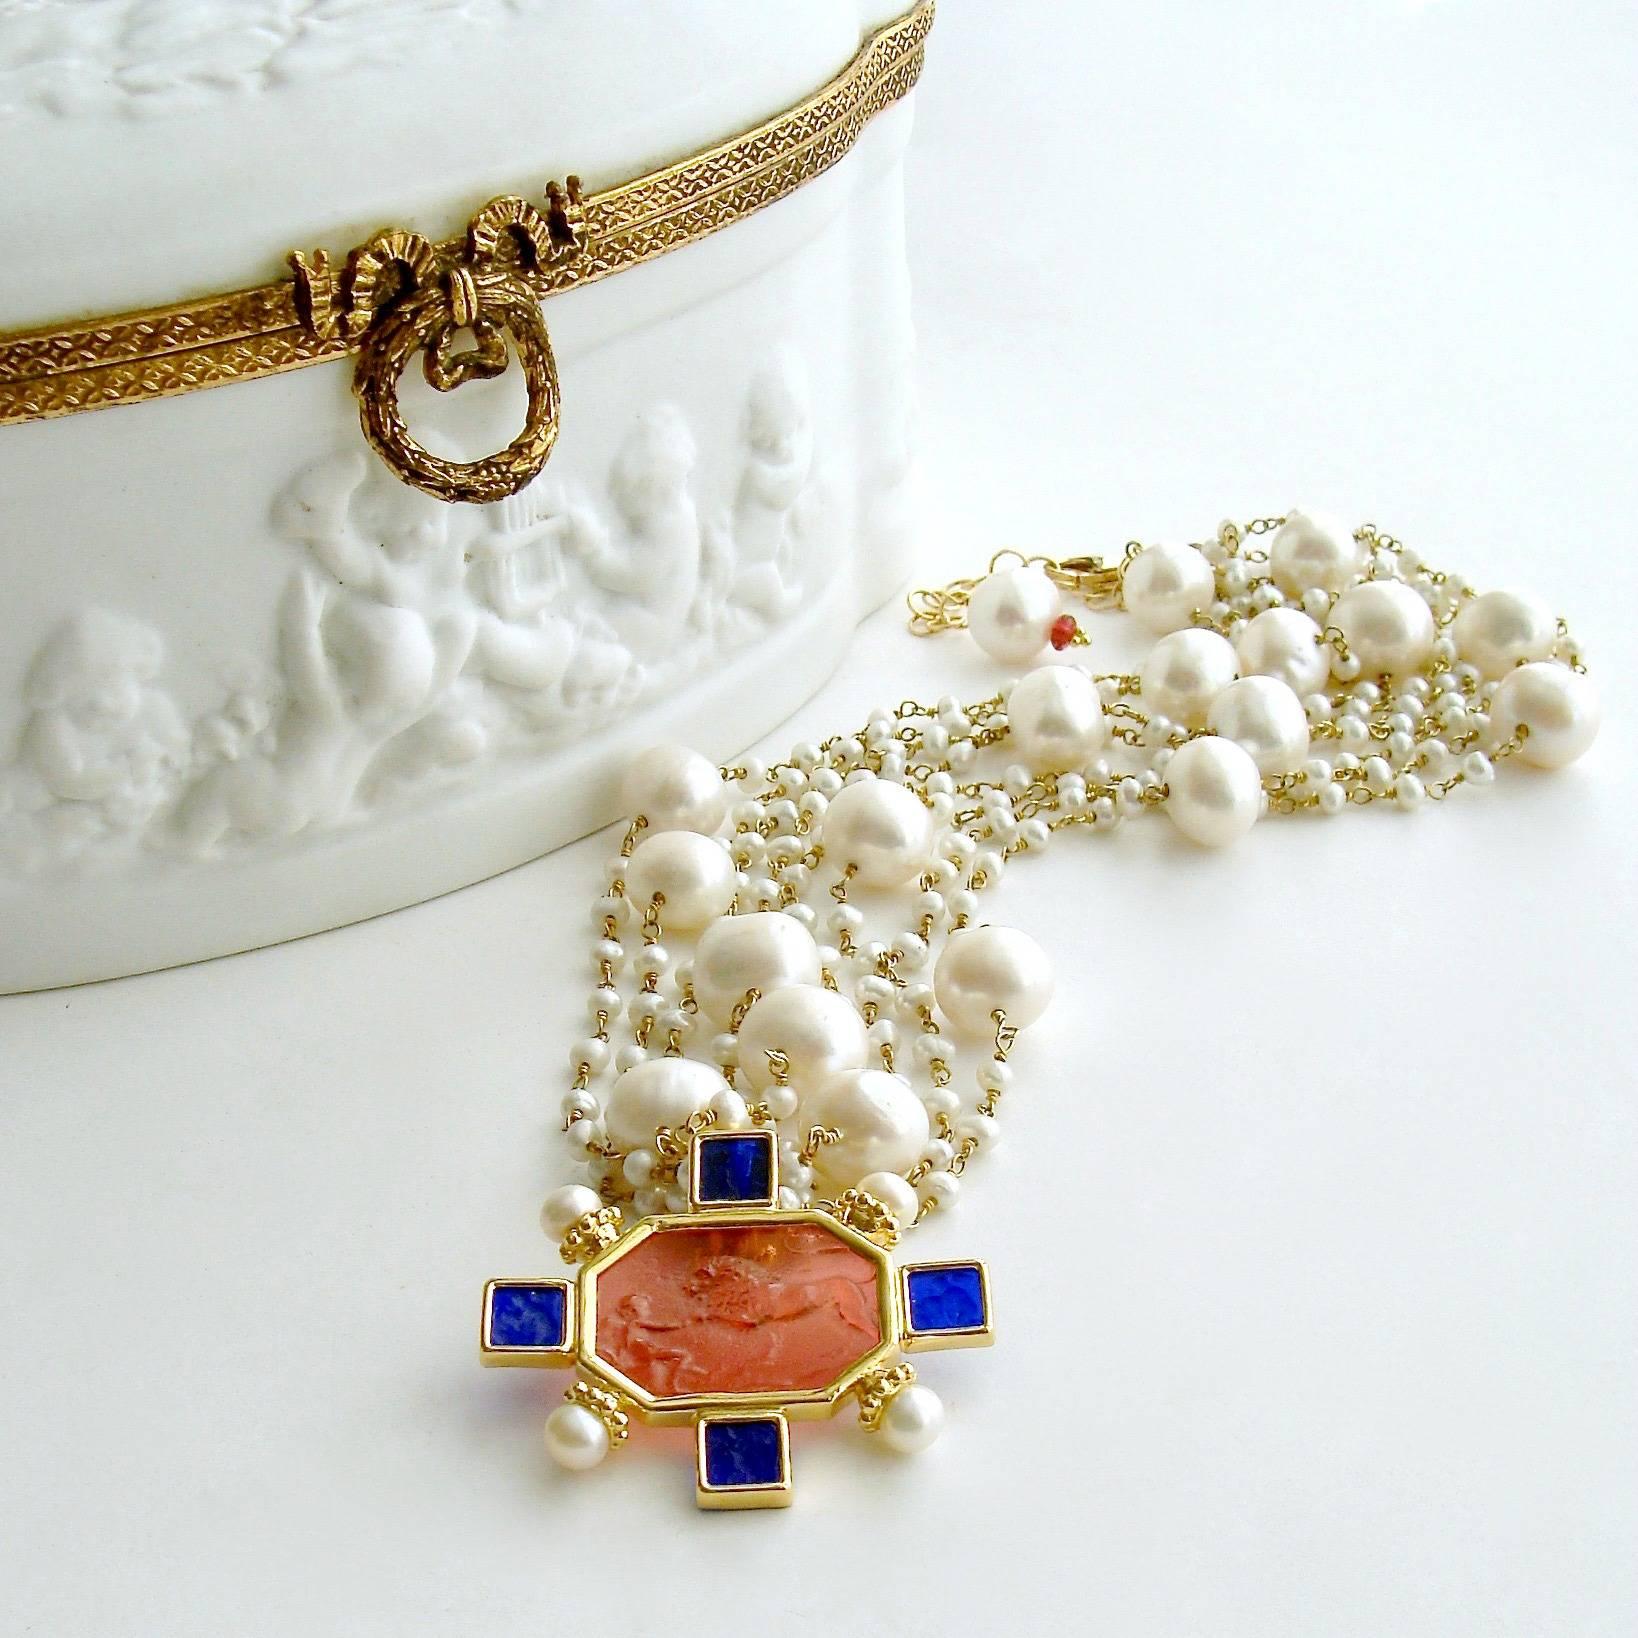 The elegant beauty of simple strands of hand-linked creamy satin pearls, intercepted by larger baroque pearls, is the perfect compliment to this neoclassical salmon pink and cobalt blue Venetian glass cameo/intaglio pendant, accented with creamy